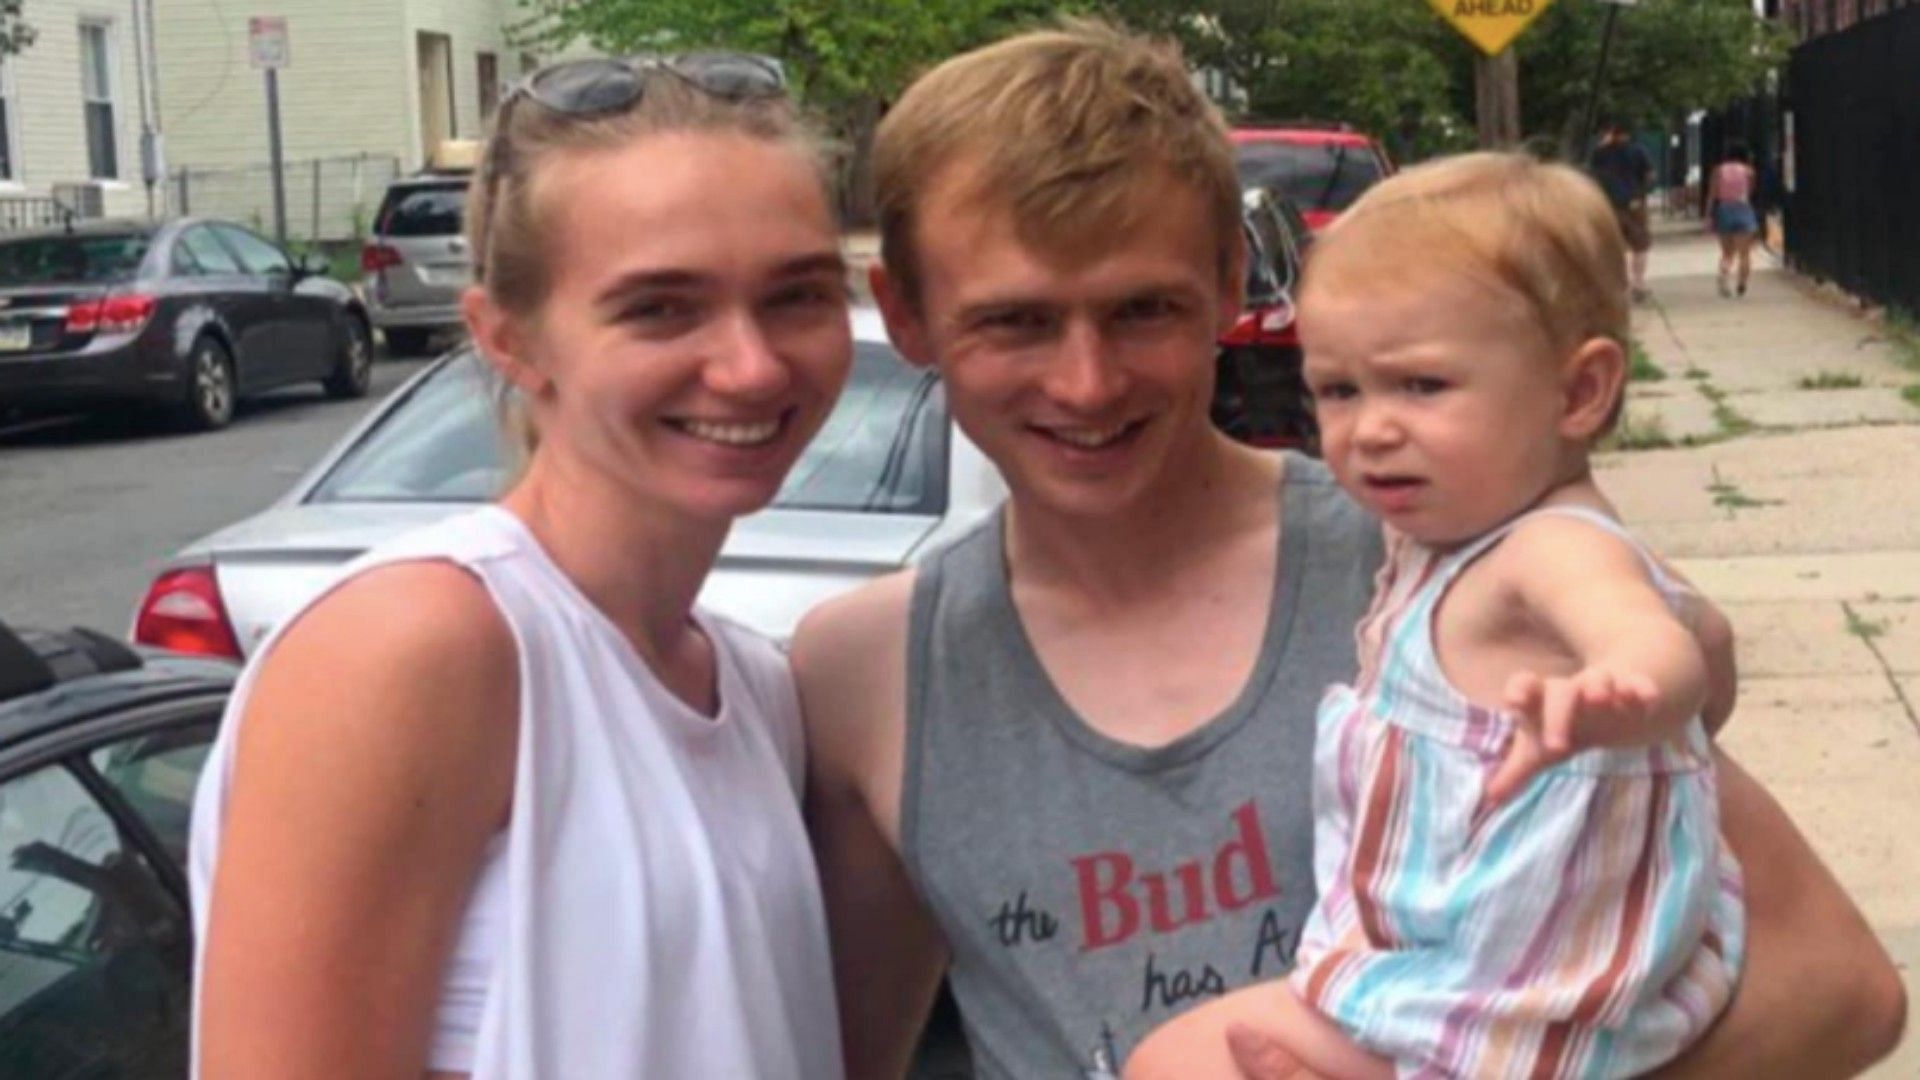 Alexander Bulakhov (M) pictured with his wife Ana and 2-year old daughter ( Image via Ben Deeter/Facebook)